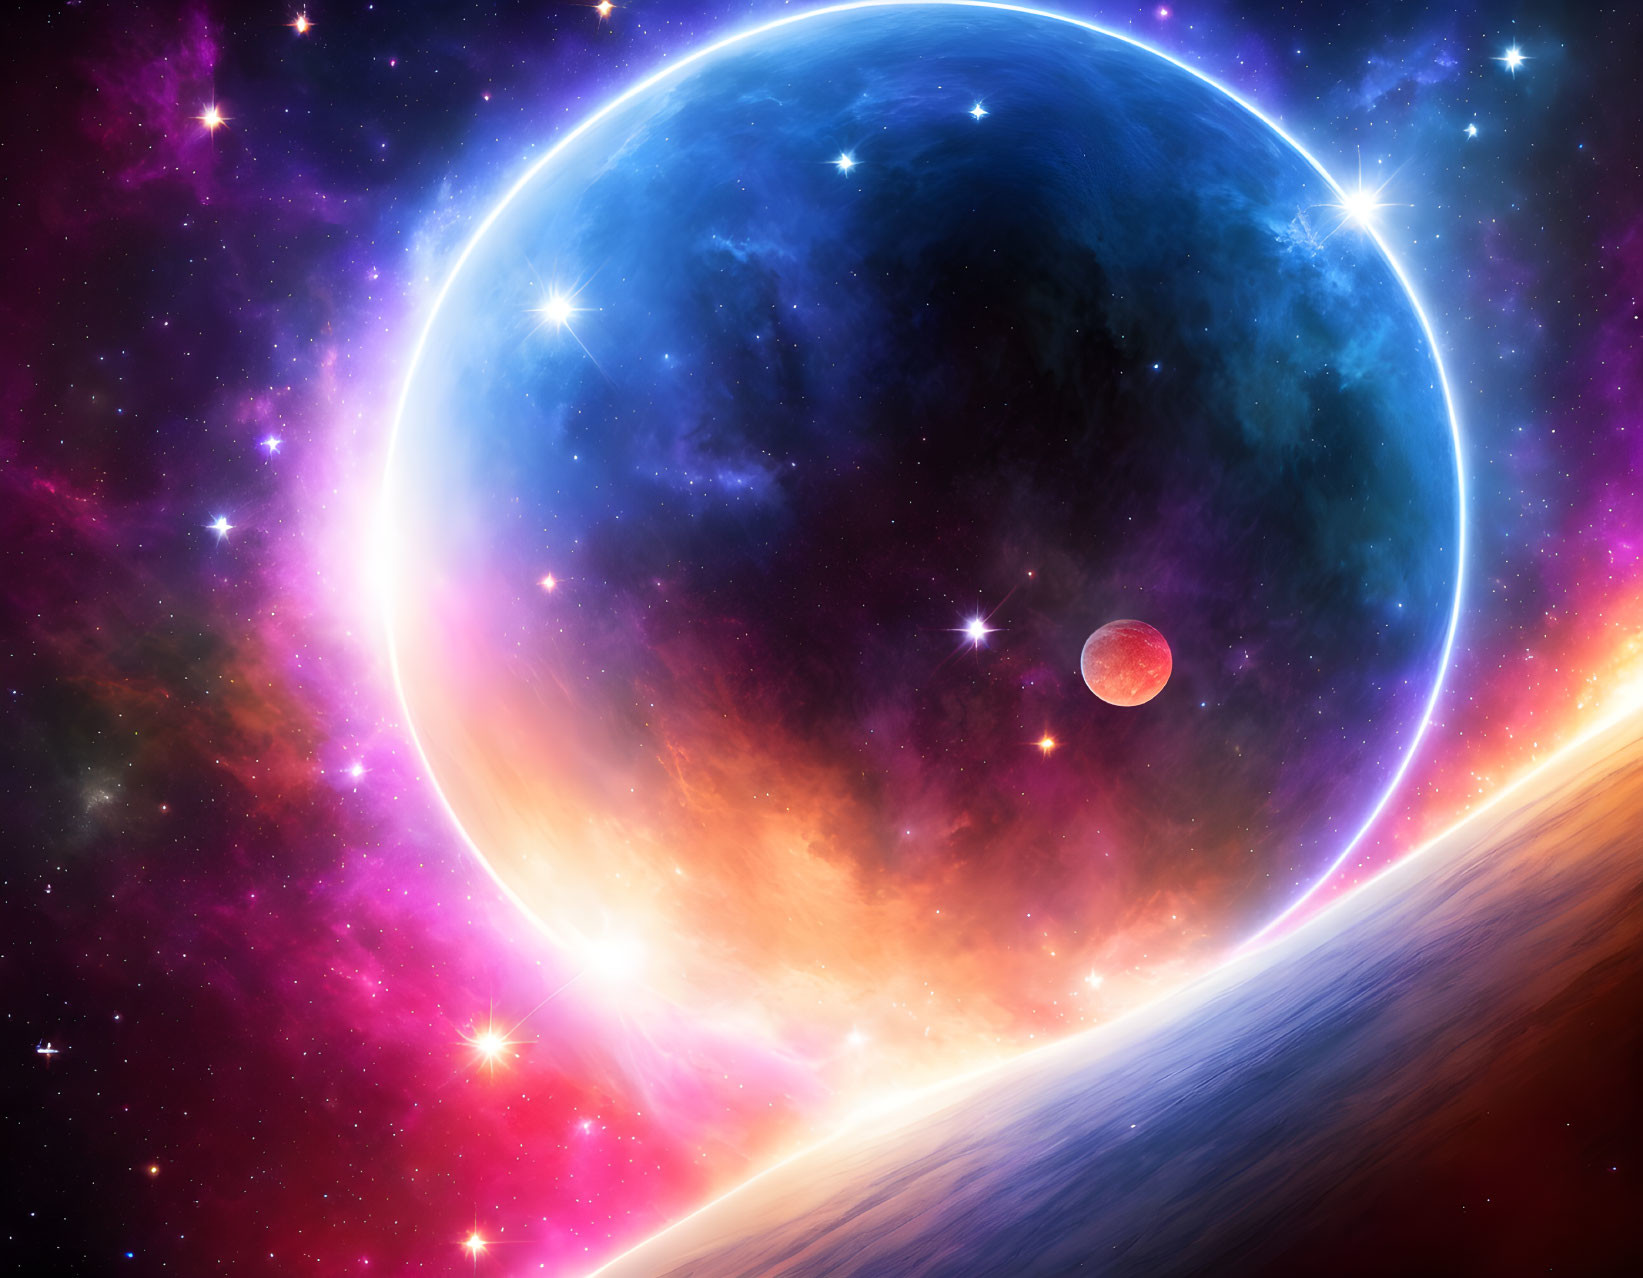 Colorful cosmic scene with blue planet, red moon, and nebula.